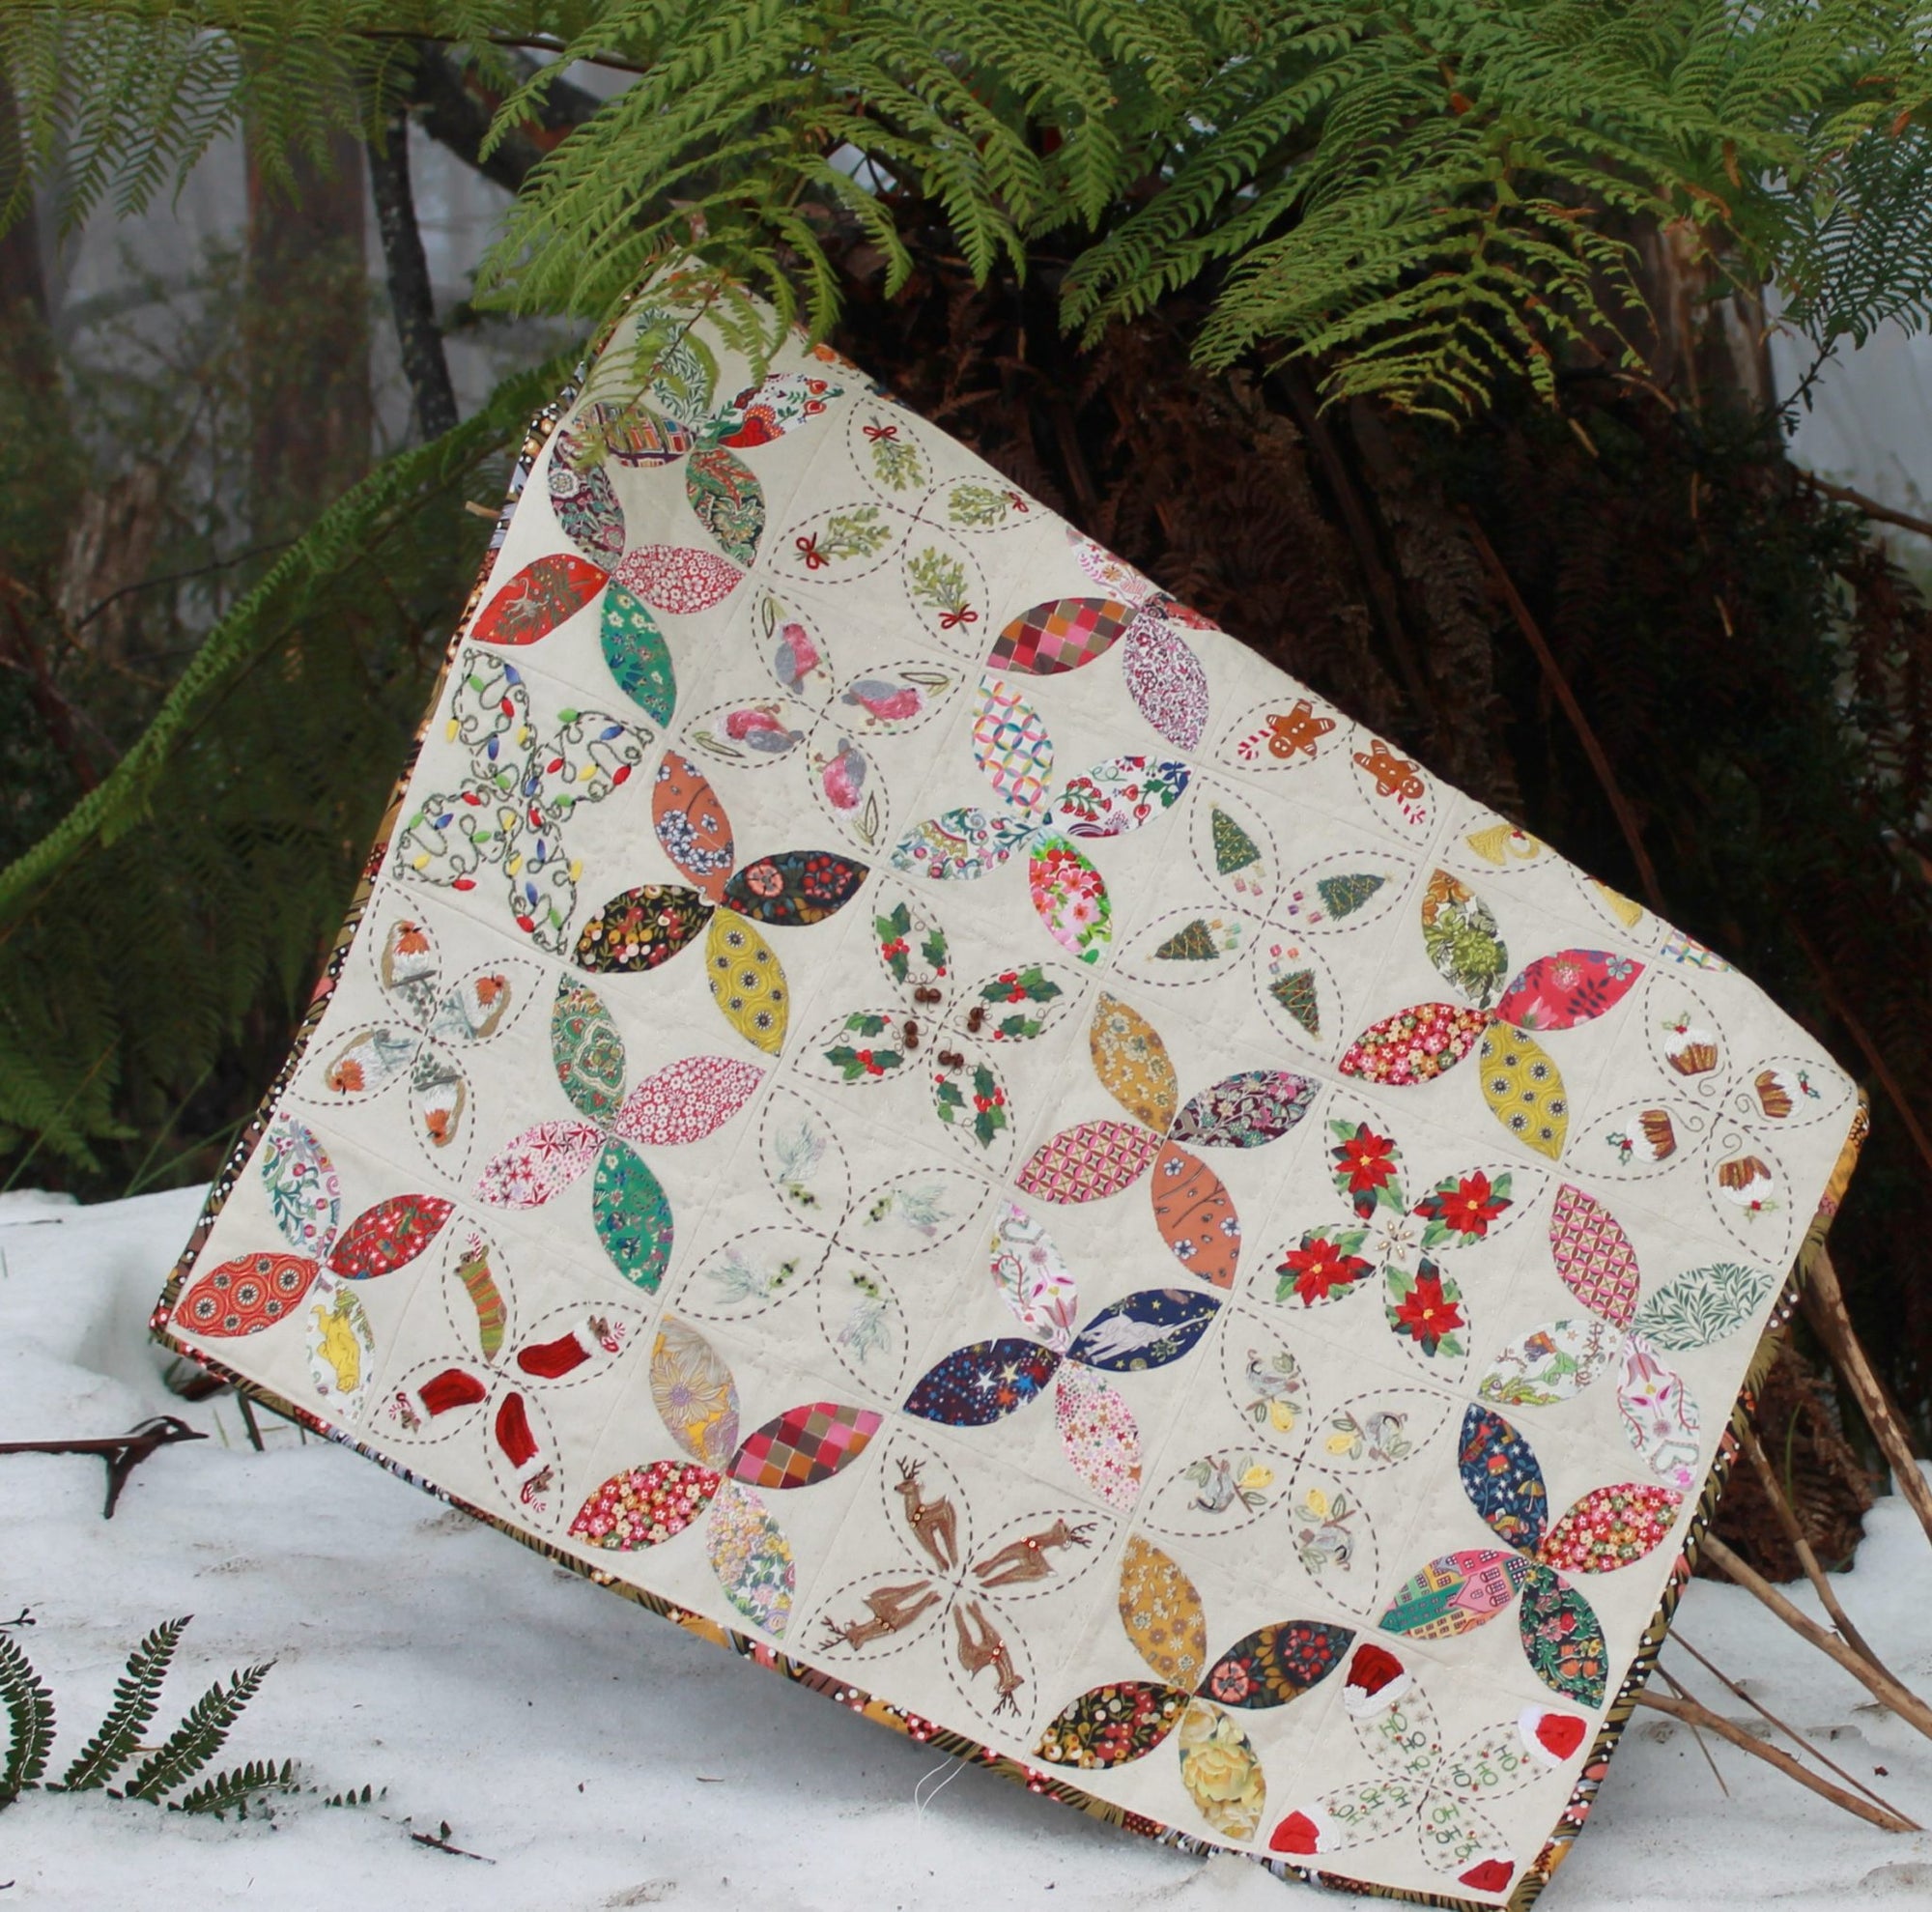 Acufactum Book: Loving Embroidery - Willow Cottage Quilt Co